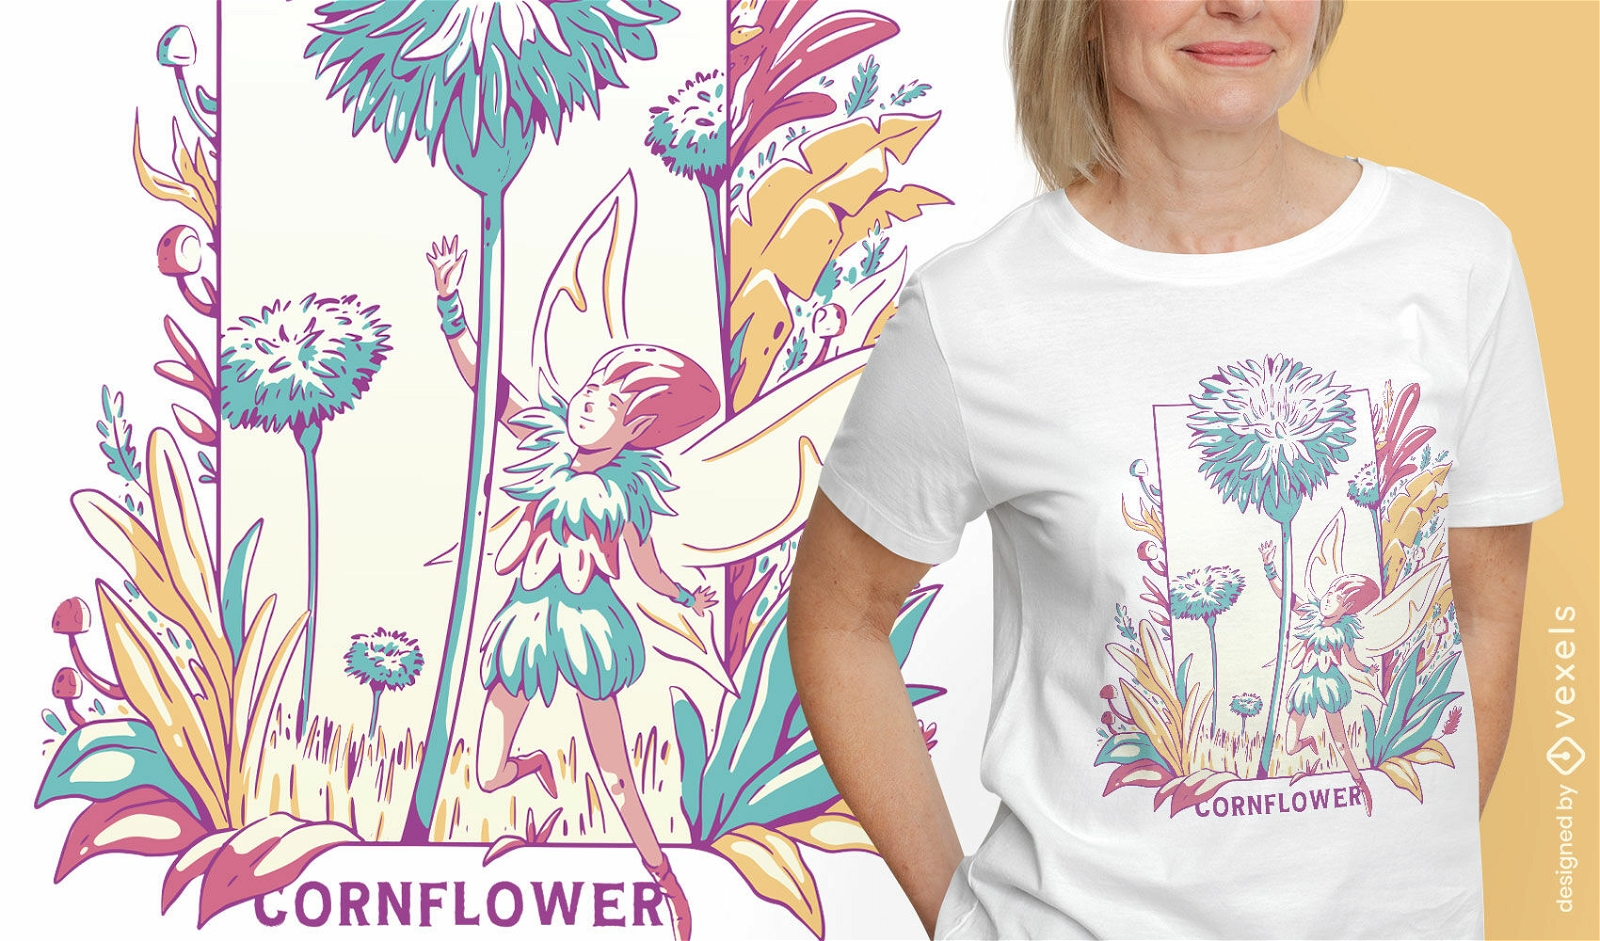 Winged fairy with flowers t-shirt design